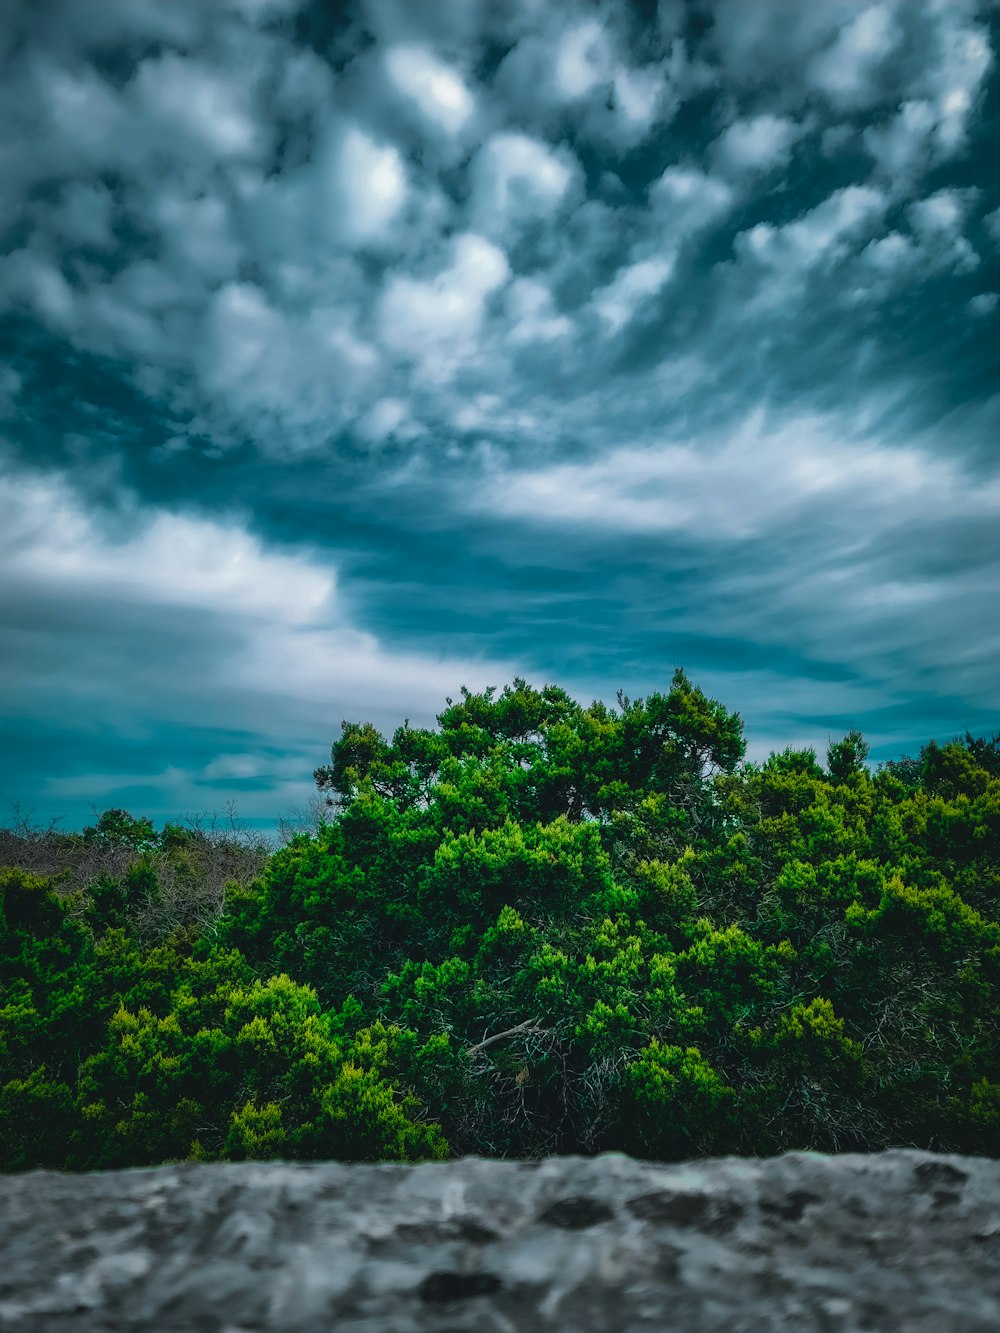 a view of a cloudy sky with trees in the foreground